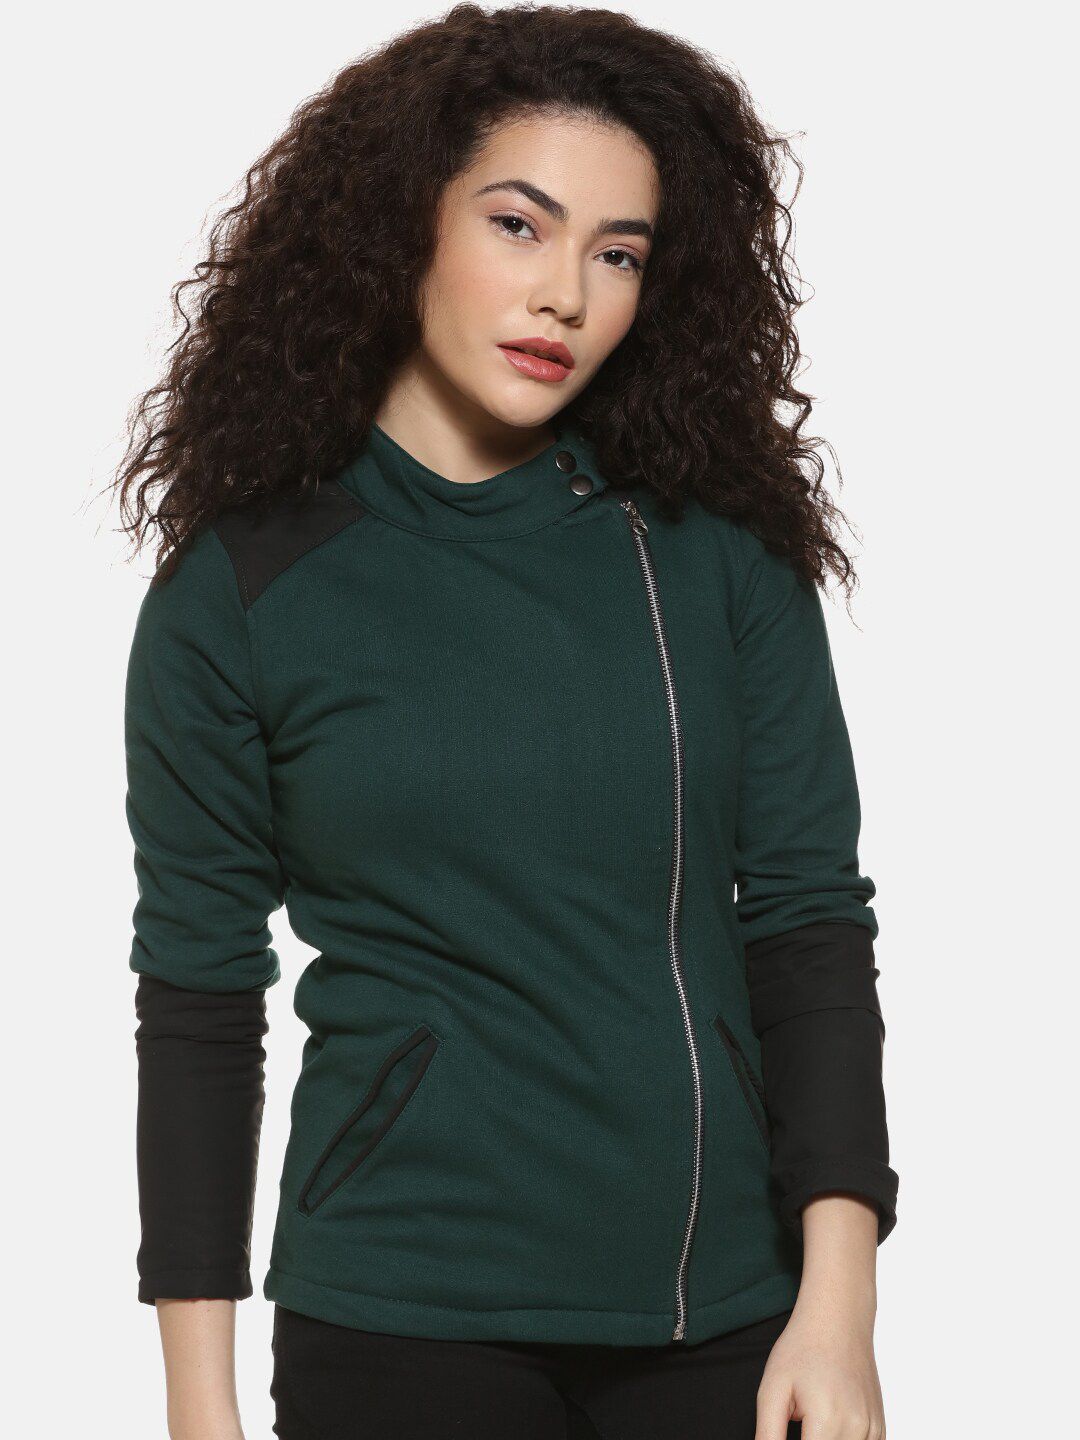 Campus Sutra Women Green Black Sporty Jacket Price in India